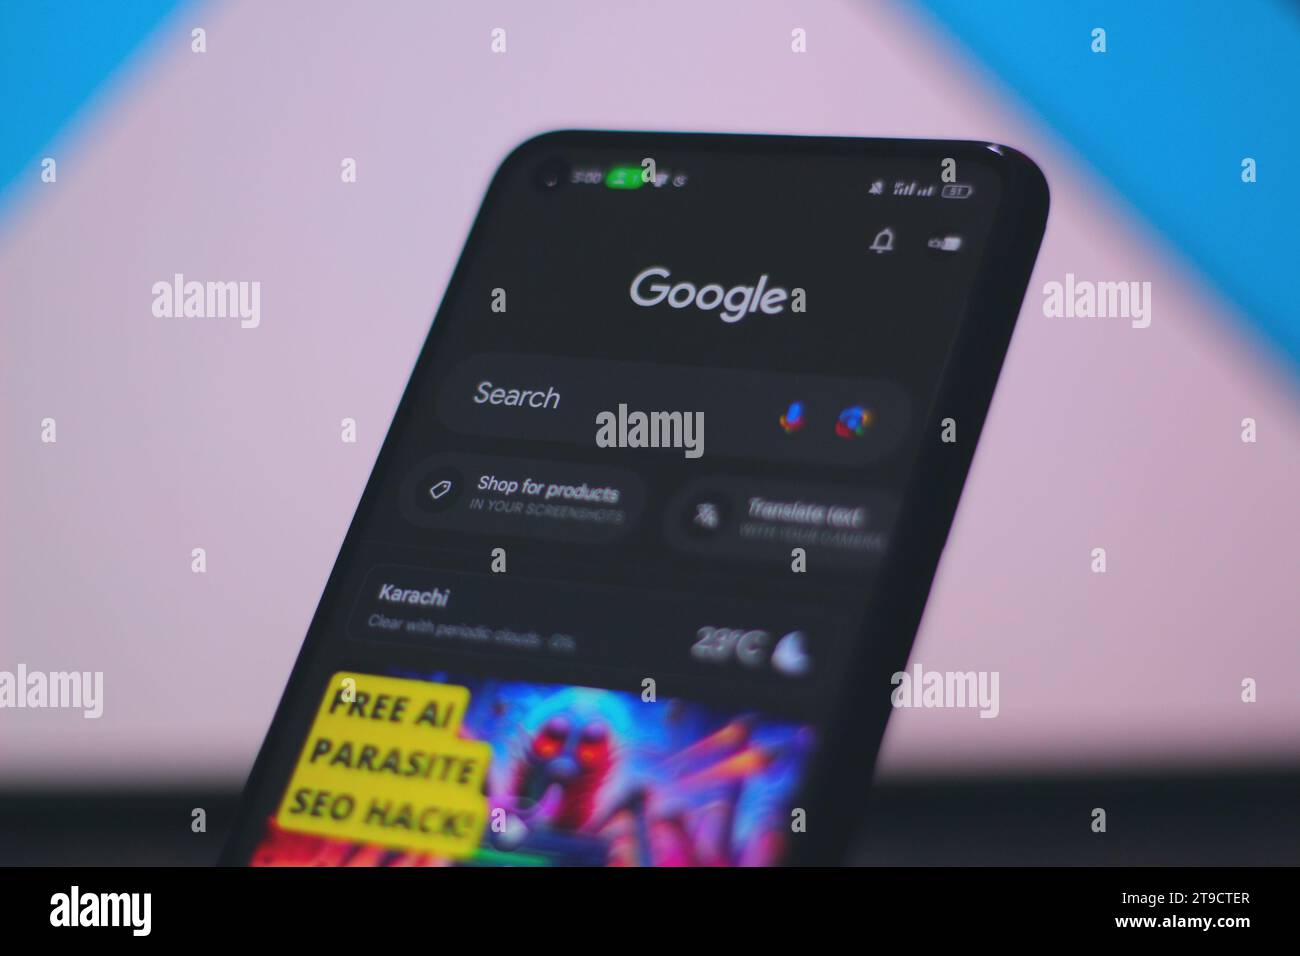 Google search option is visible on the android mobile screen Stock Photo